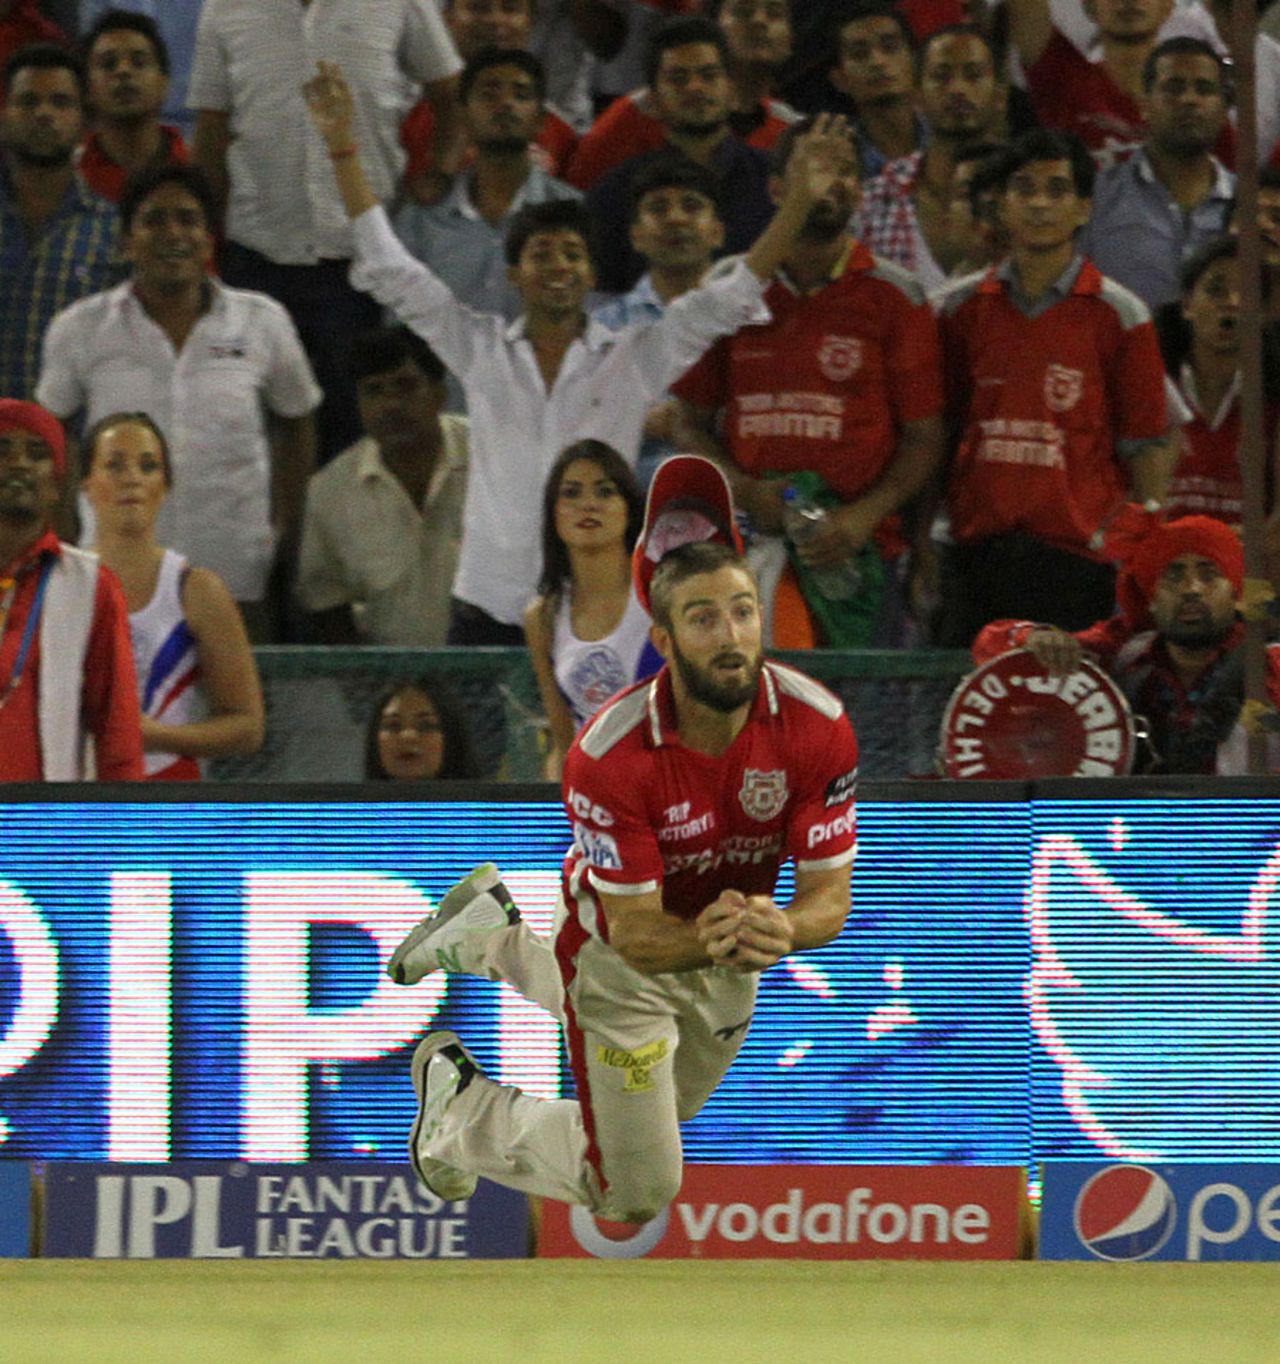 Shaun Marsh dives in the outfield to complete a fine running catch, Kings XI Punjab v Rajasthan Royals, IPL 2014, Mohali, May 23, 2014